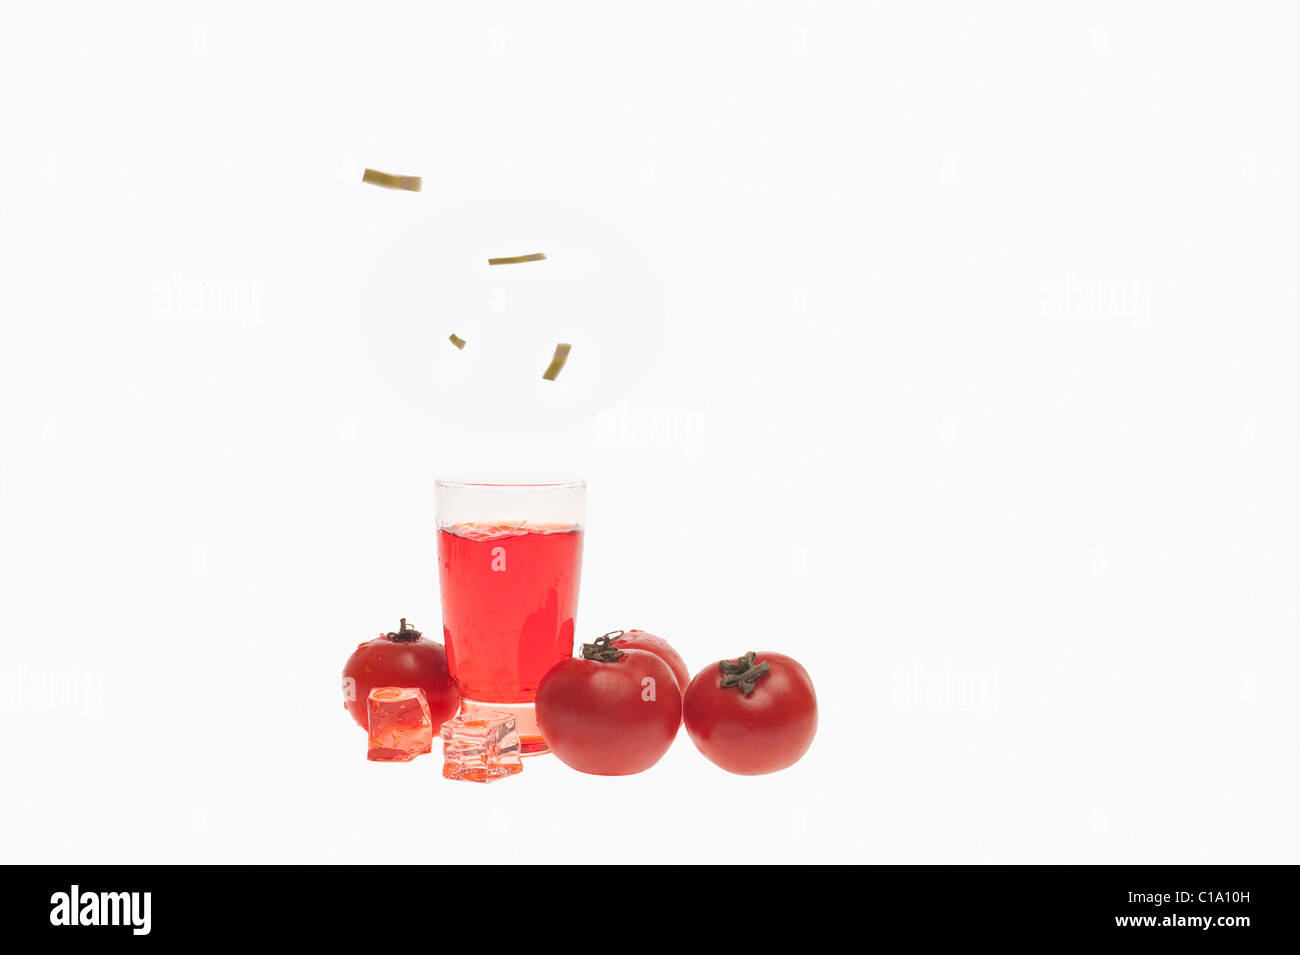 Close-up of tomatoes with a glass of tomato juice Stock Photo